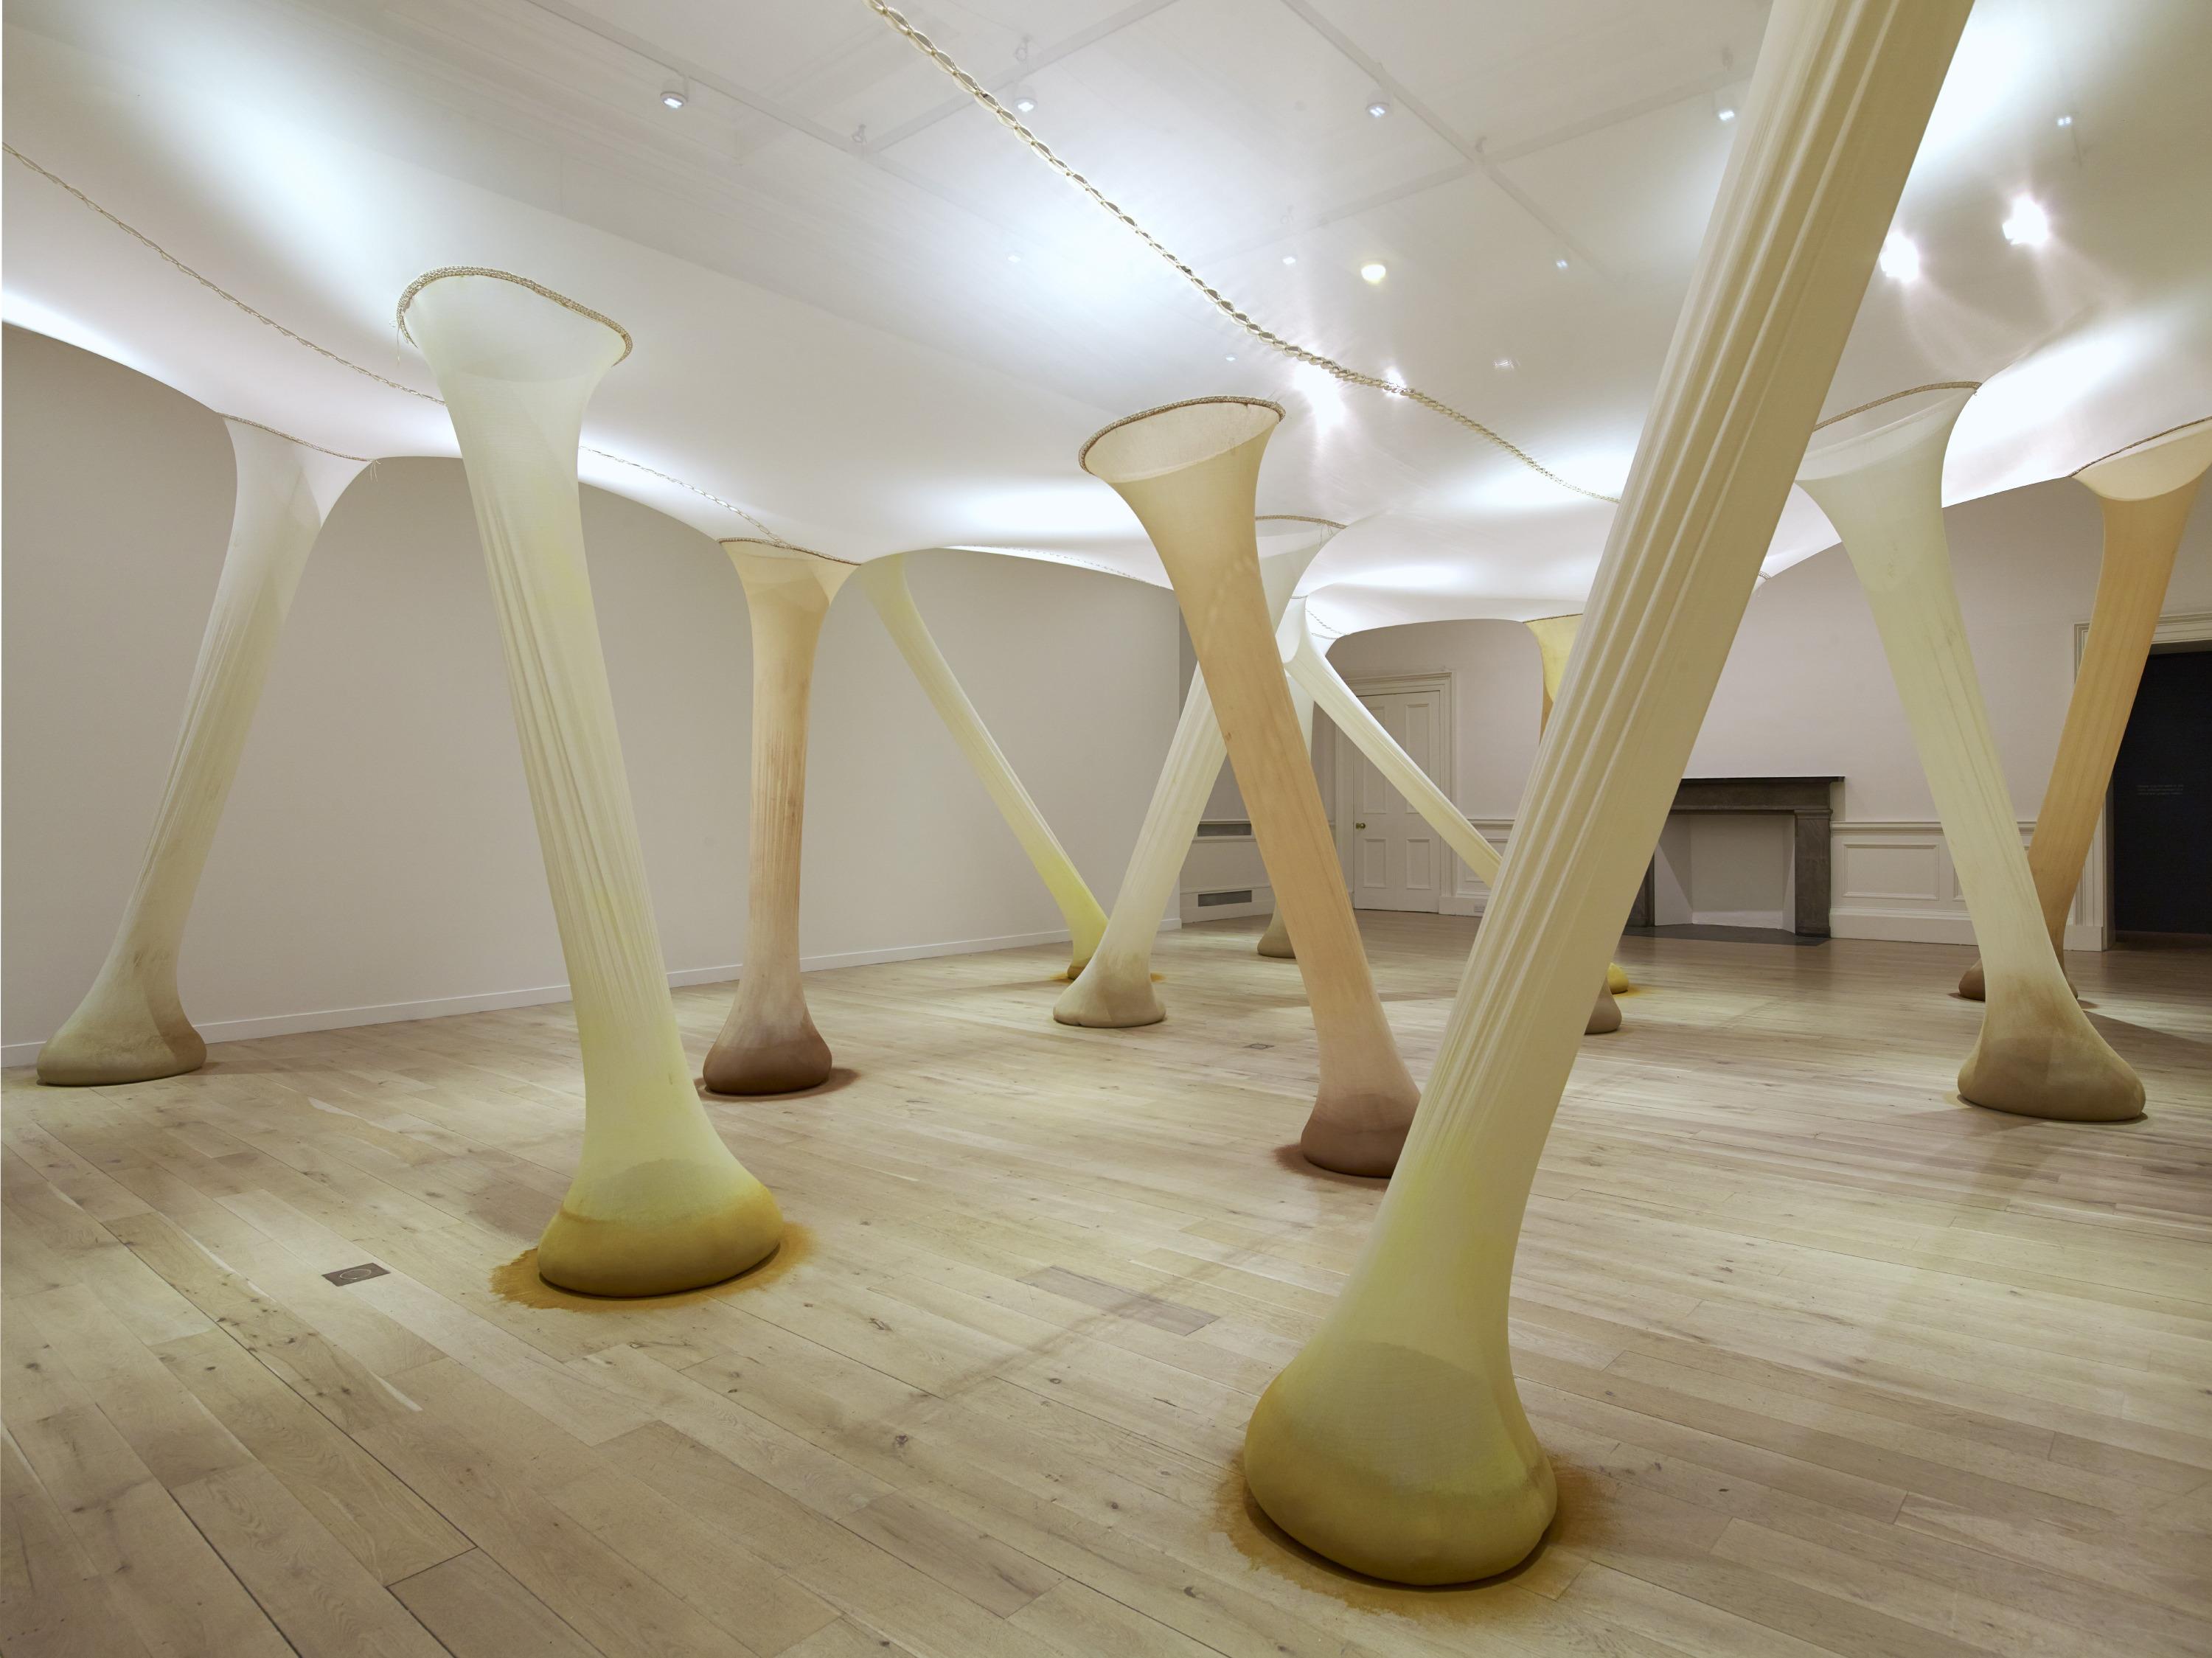 sculptural installation of large tendrils spanning from floor to ceiling fills gallery